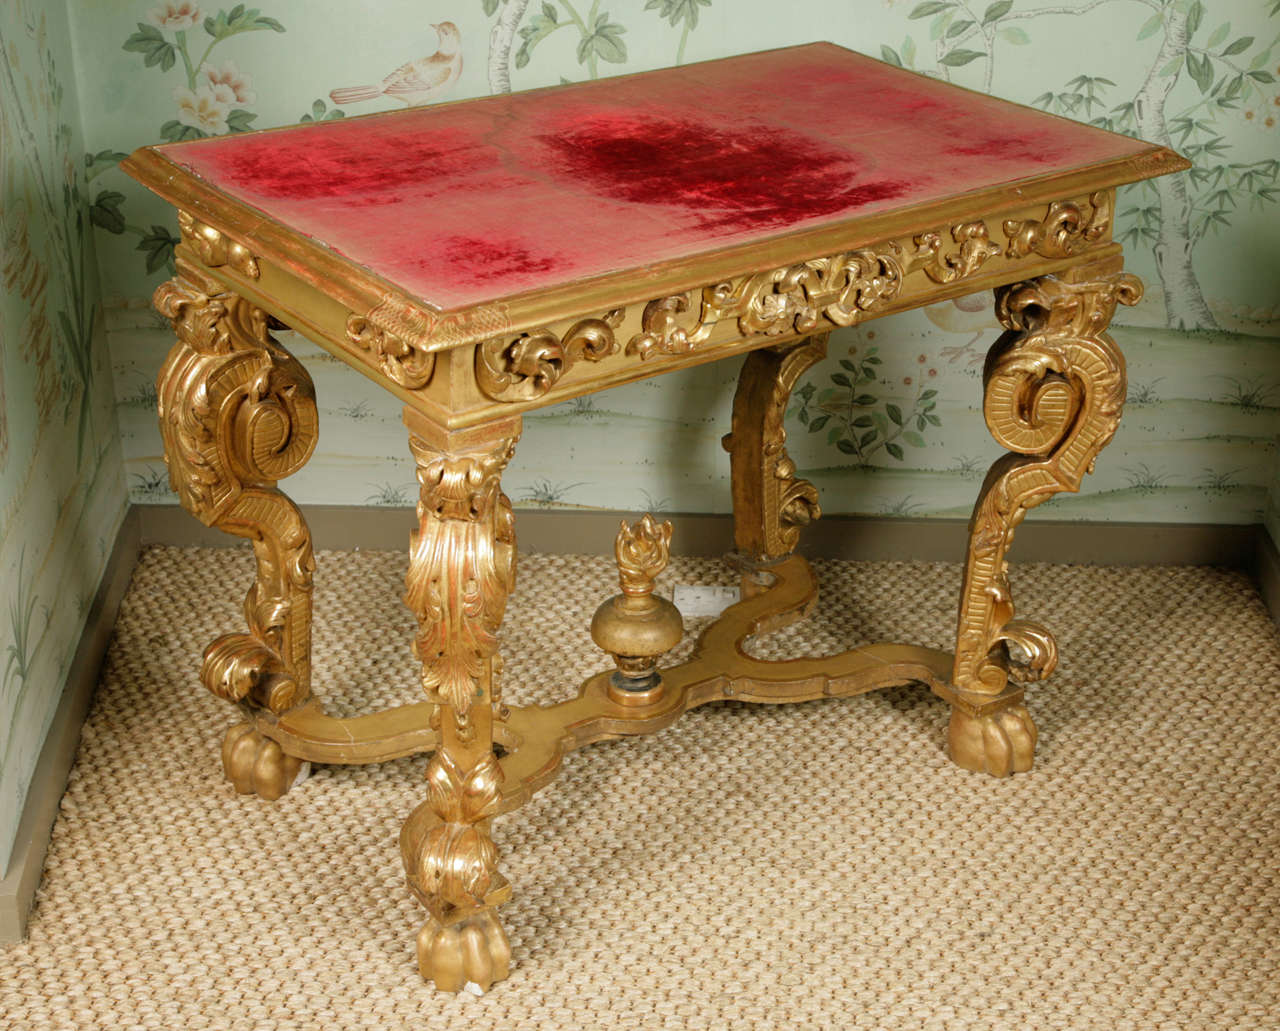 A finely carved gilt wood and gesso console table dating from the last quarter of the seventeenth century. The curvature of the legs, paw feet and stretcher surmounted by an urn are suggestive of an Italian origin. Table top covered in antique red